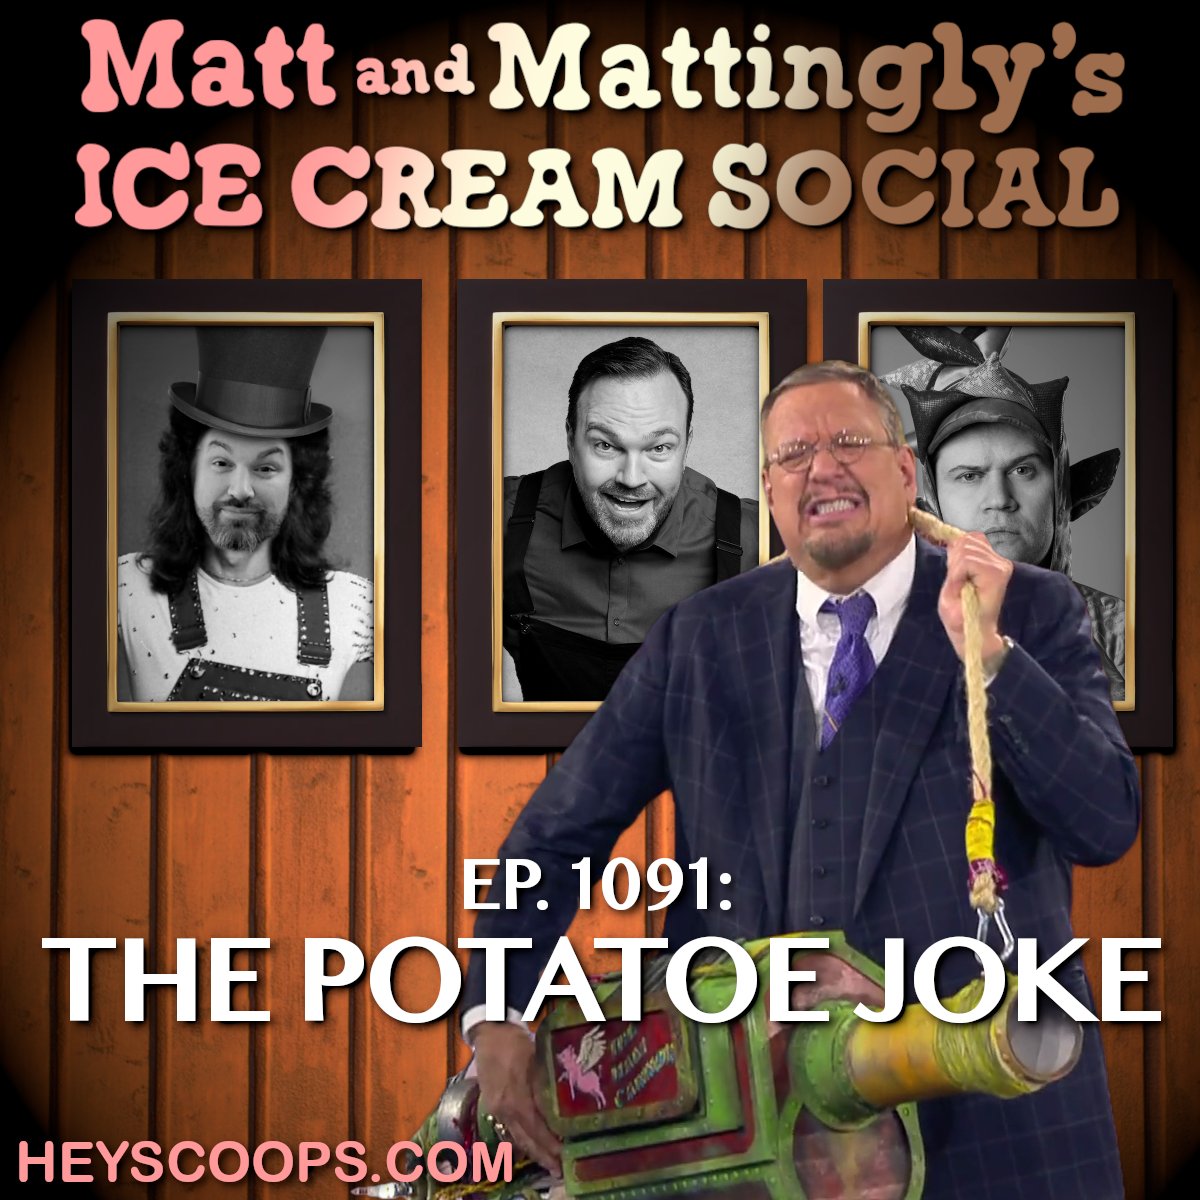 We check in on what fruit Paul's leg looks like. The boys discuss Matt's latest Fool Us appearance and why he chose Dan Quayle. Then Matt reveals a strange result from his Fool Us clip. Find Ep. 1091: The Potatoe Joke at heyscoops.com and on various podcast apps. #FYITF